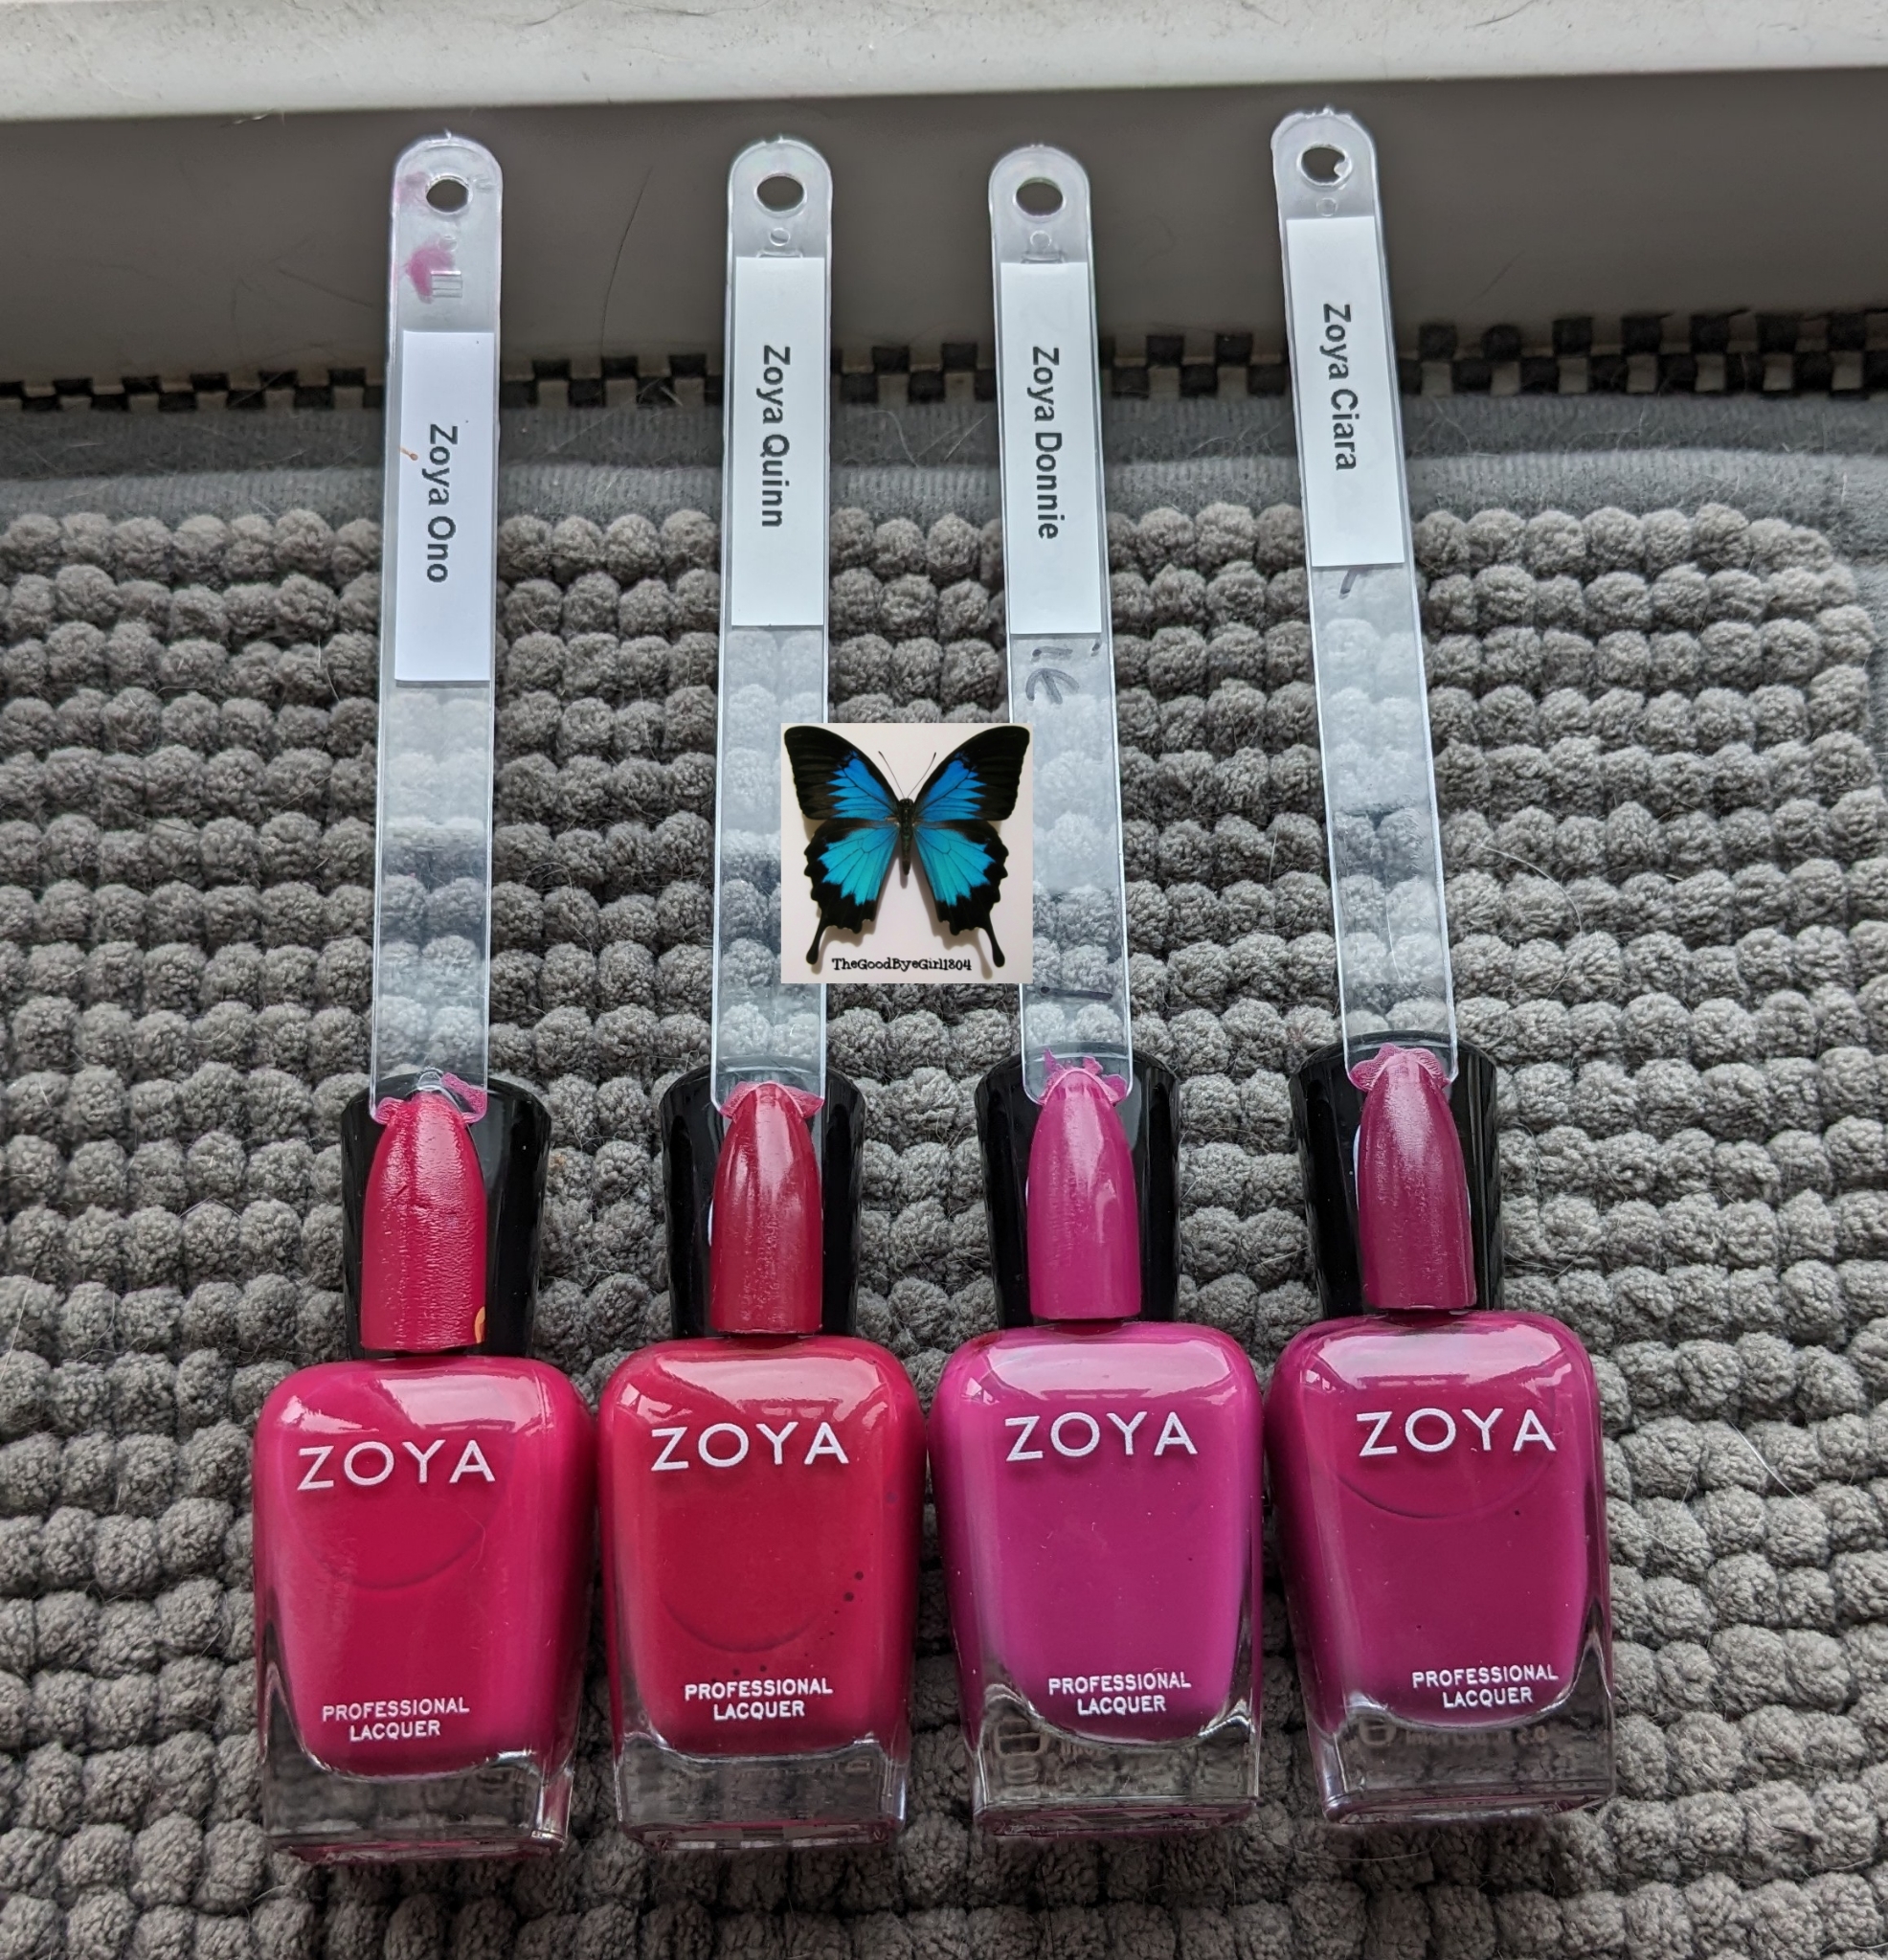 Are You Ready For This Jelly? Introducing the Zoya Jelly Brites! | Laugh,  Love, Contour